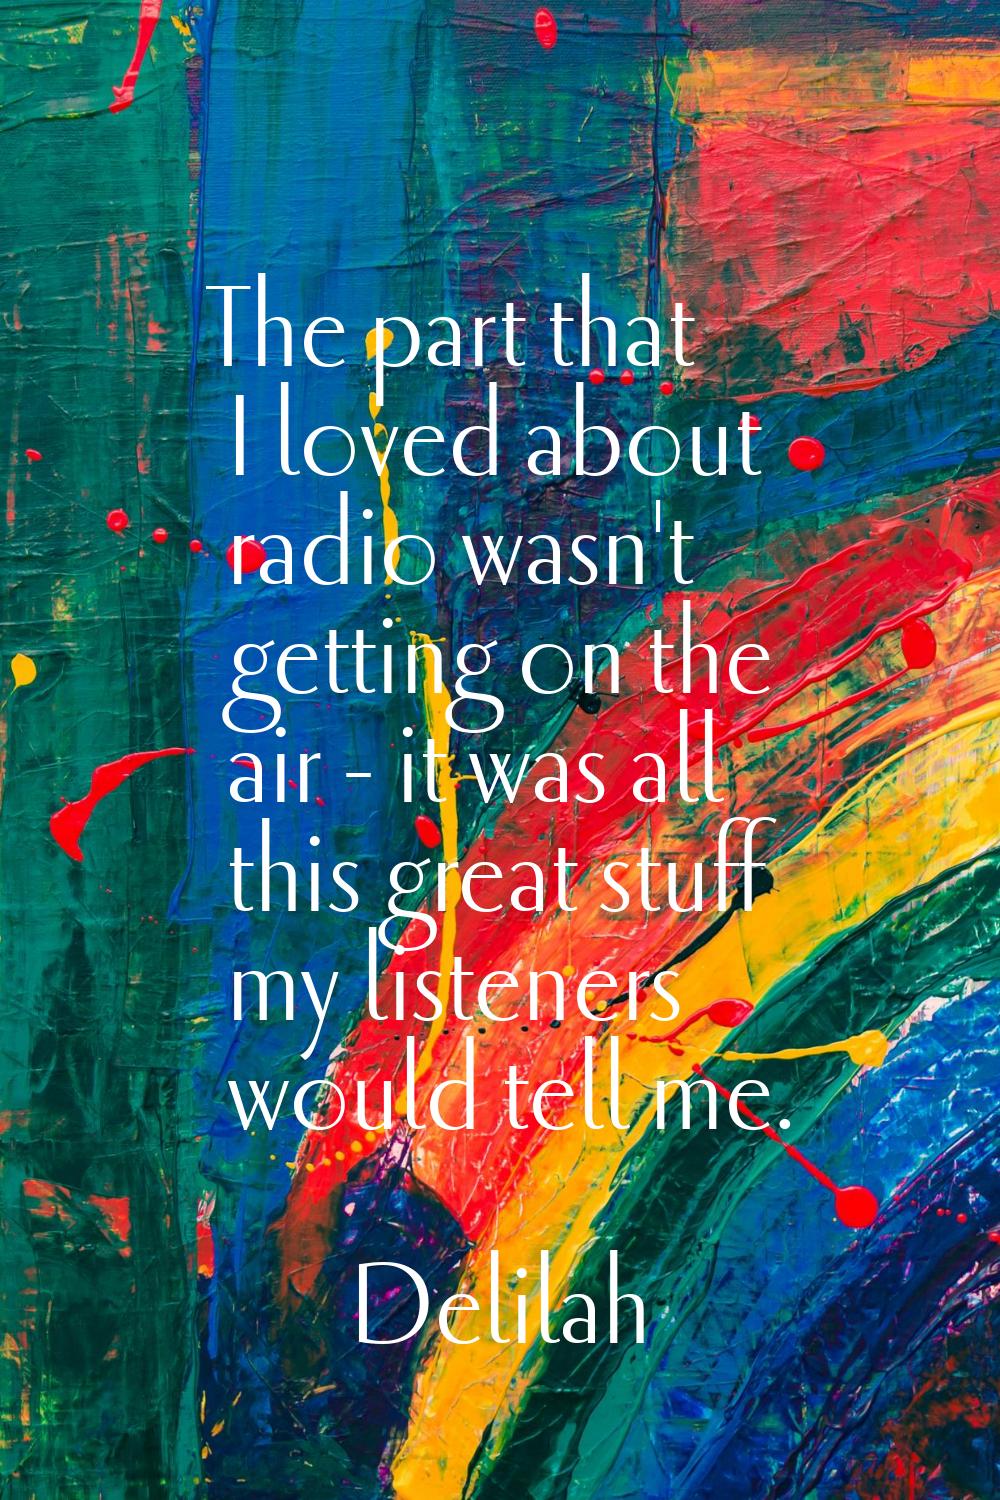 The part that I loved about radio wasn't getting on the air - it was all this great stuff my listen